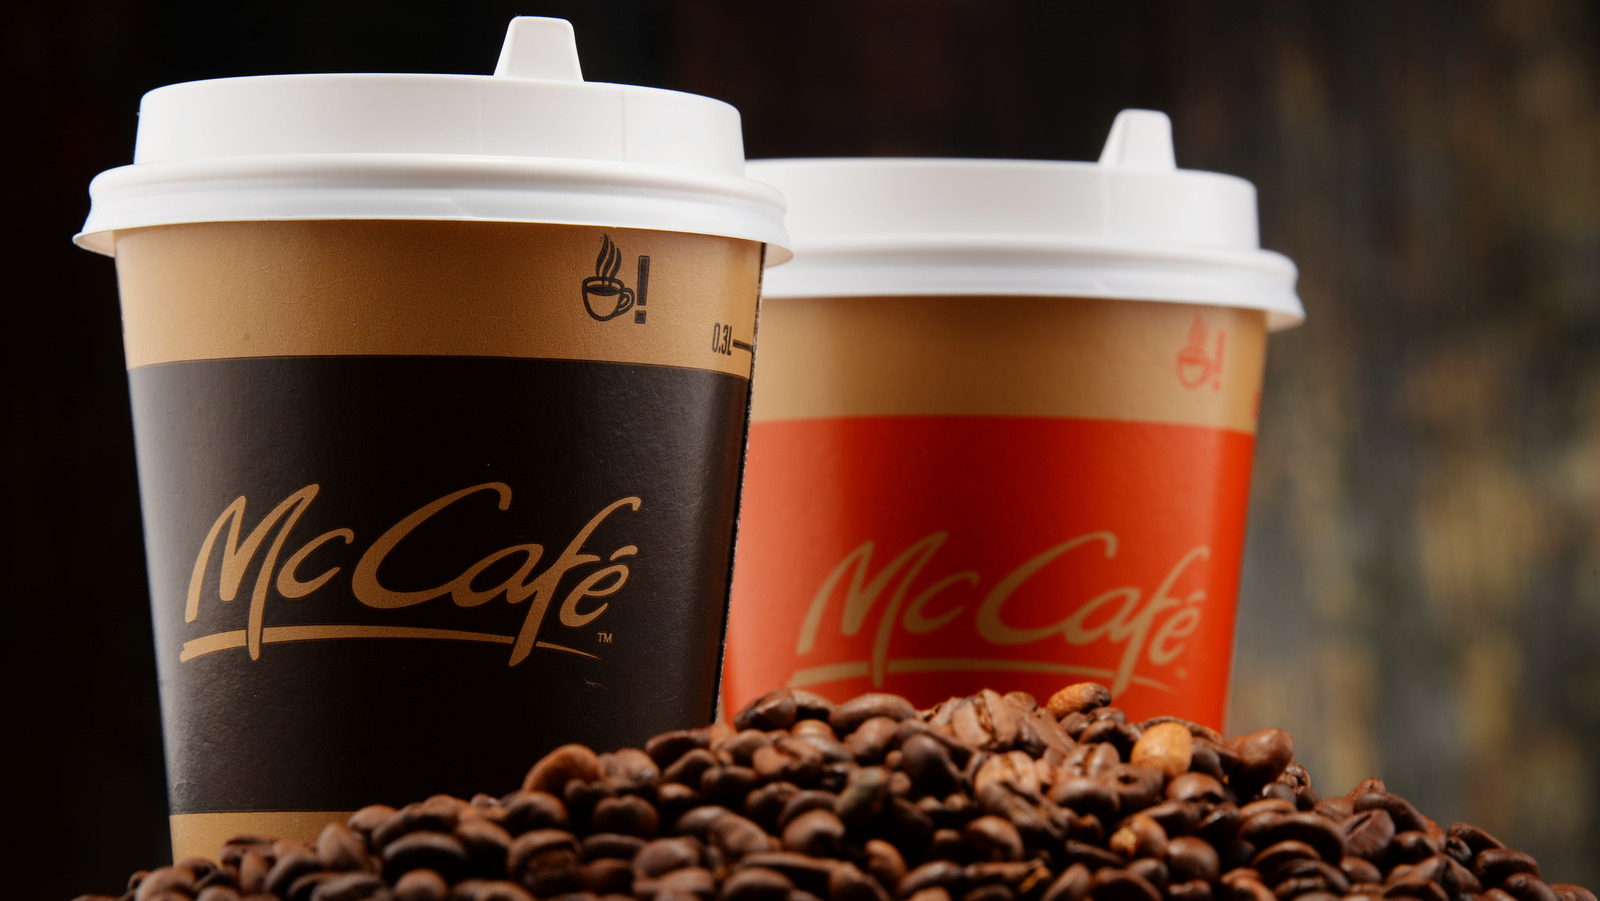 https://www.tastingtable.com/img/gallery/the-family-owned-coffee-supplier-mcdonalds-uses-for-its-brews/l-intro-1697228544.jpg